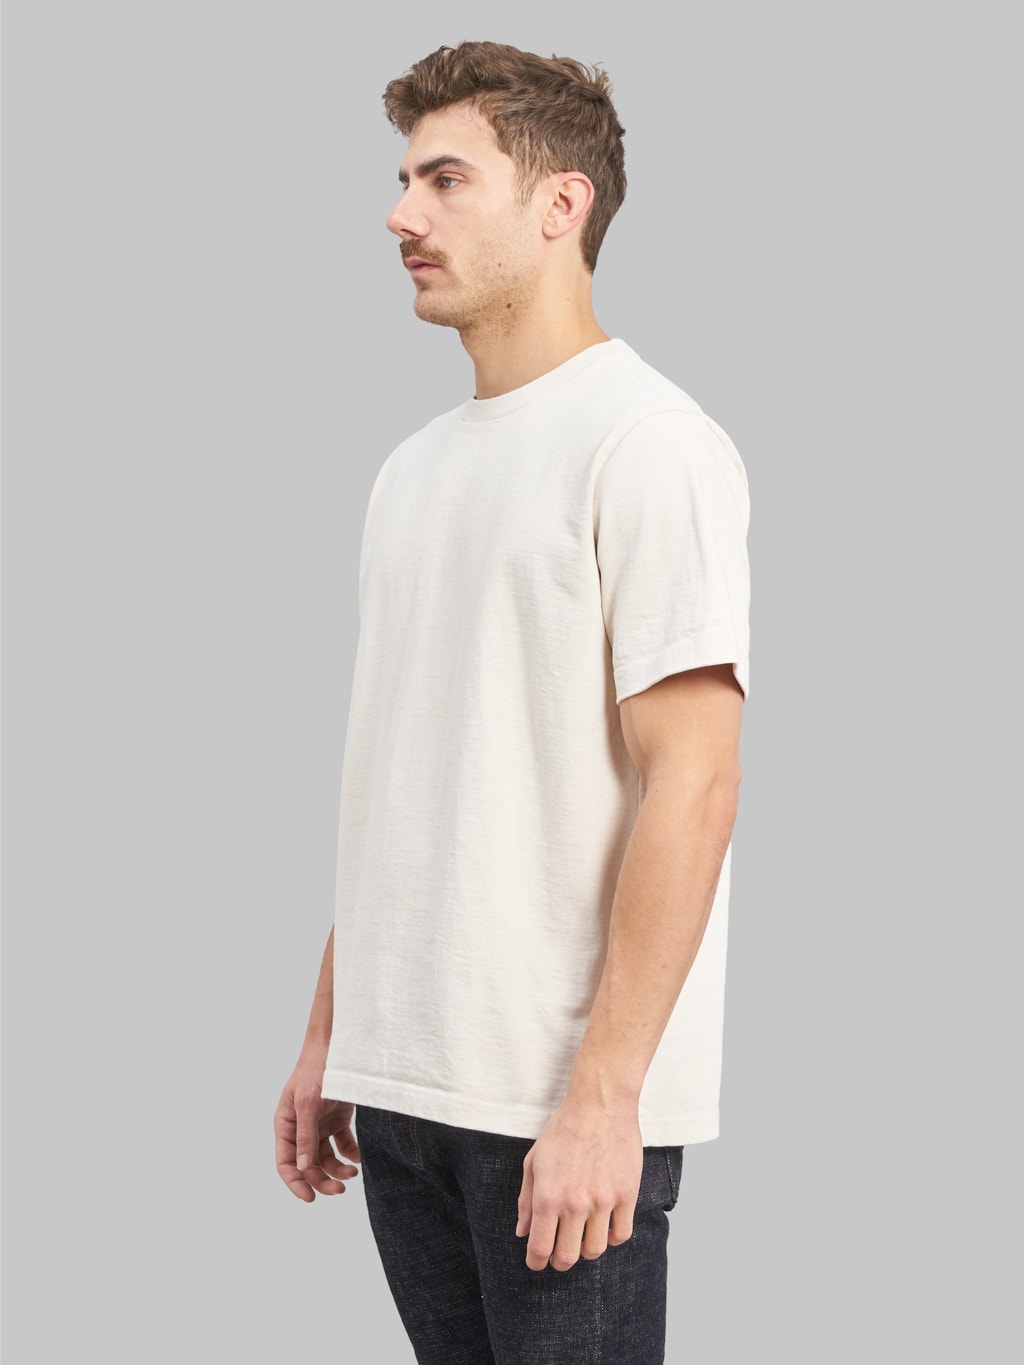 jackman dotsume tshirt off birch ivory model side fit